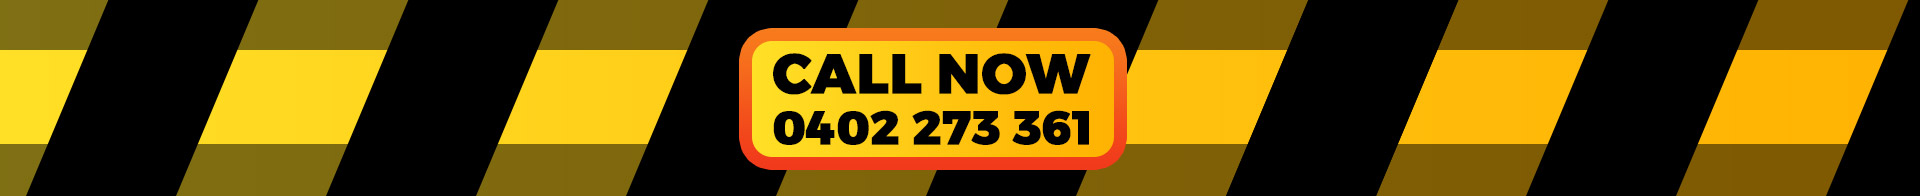 call book towing adelaide